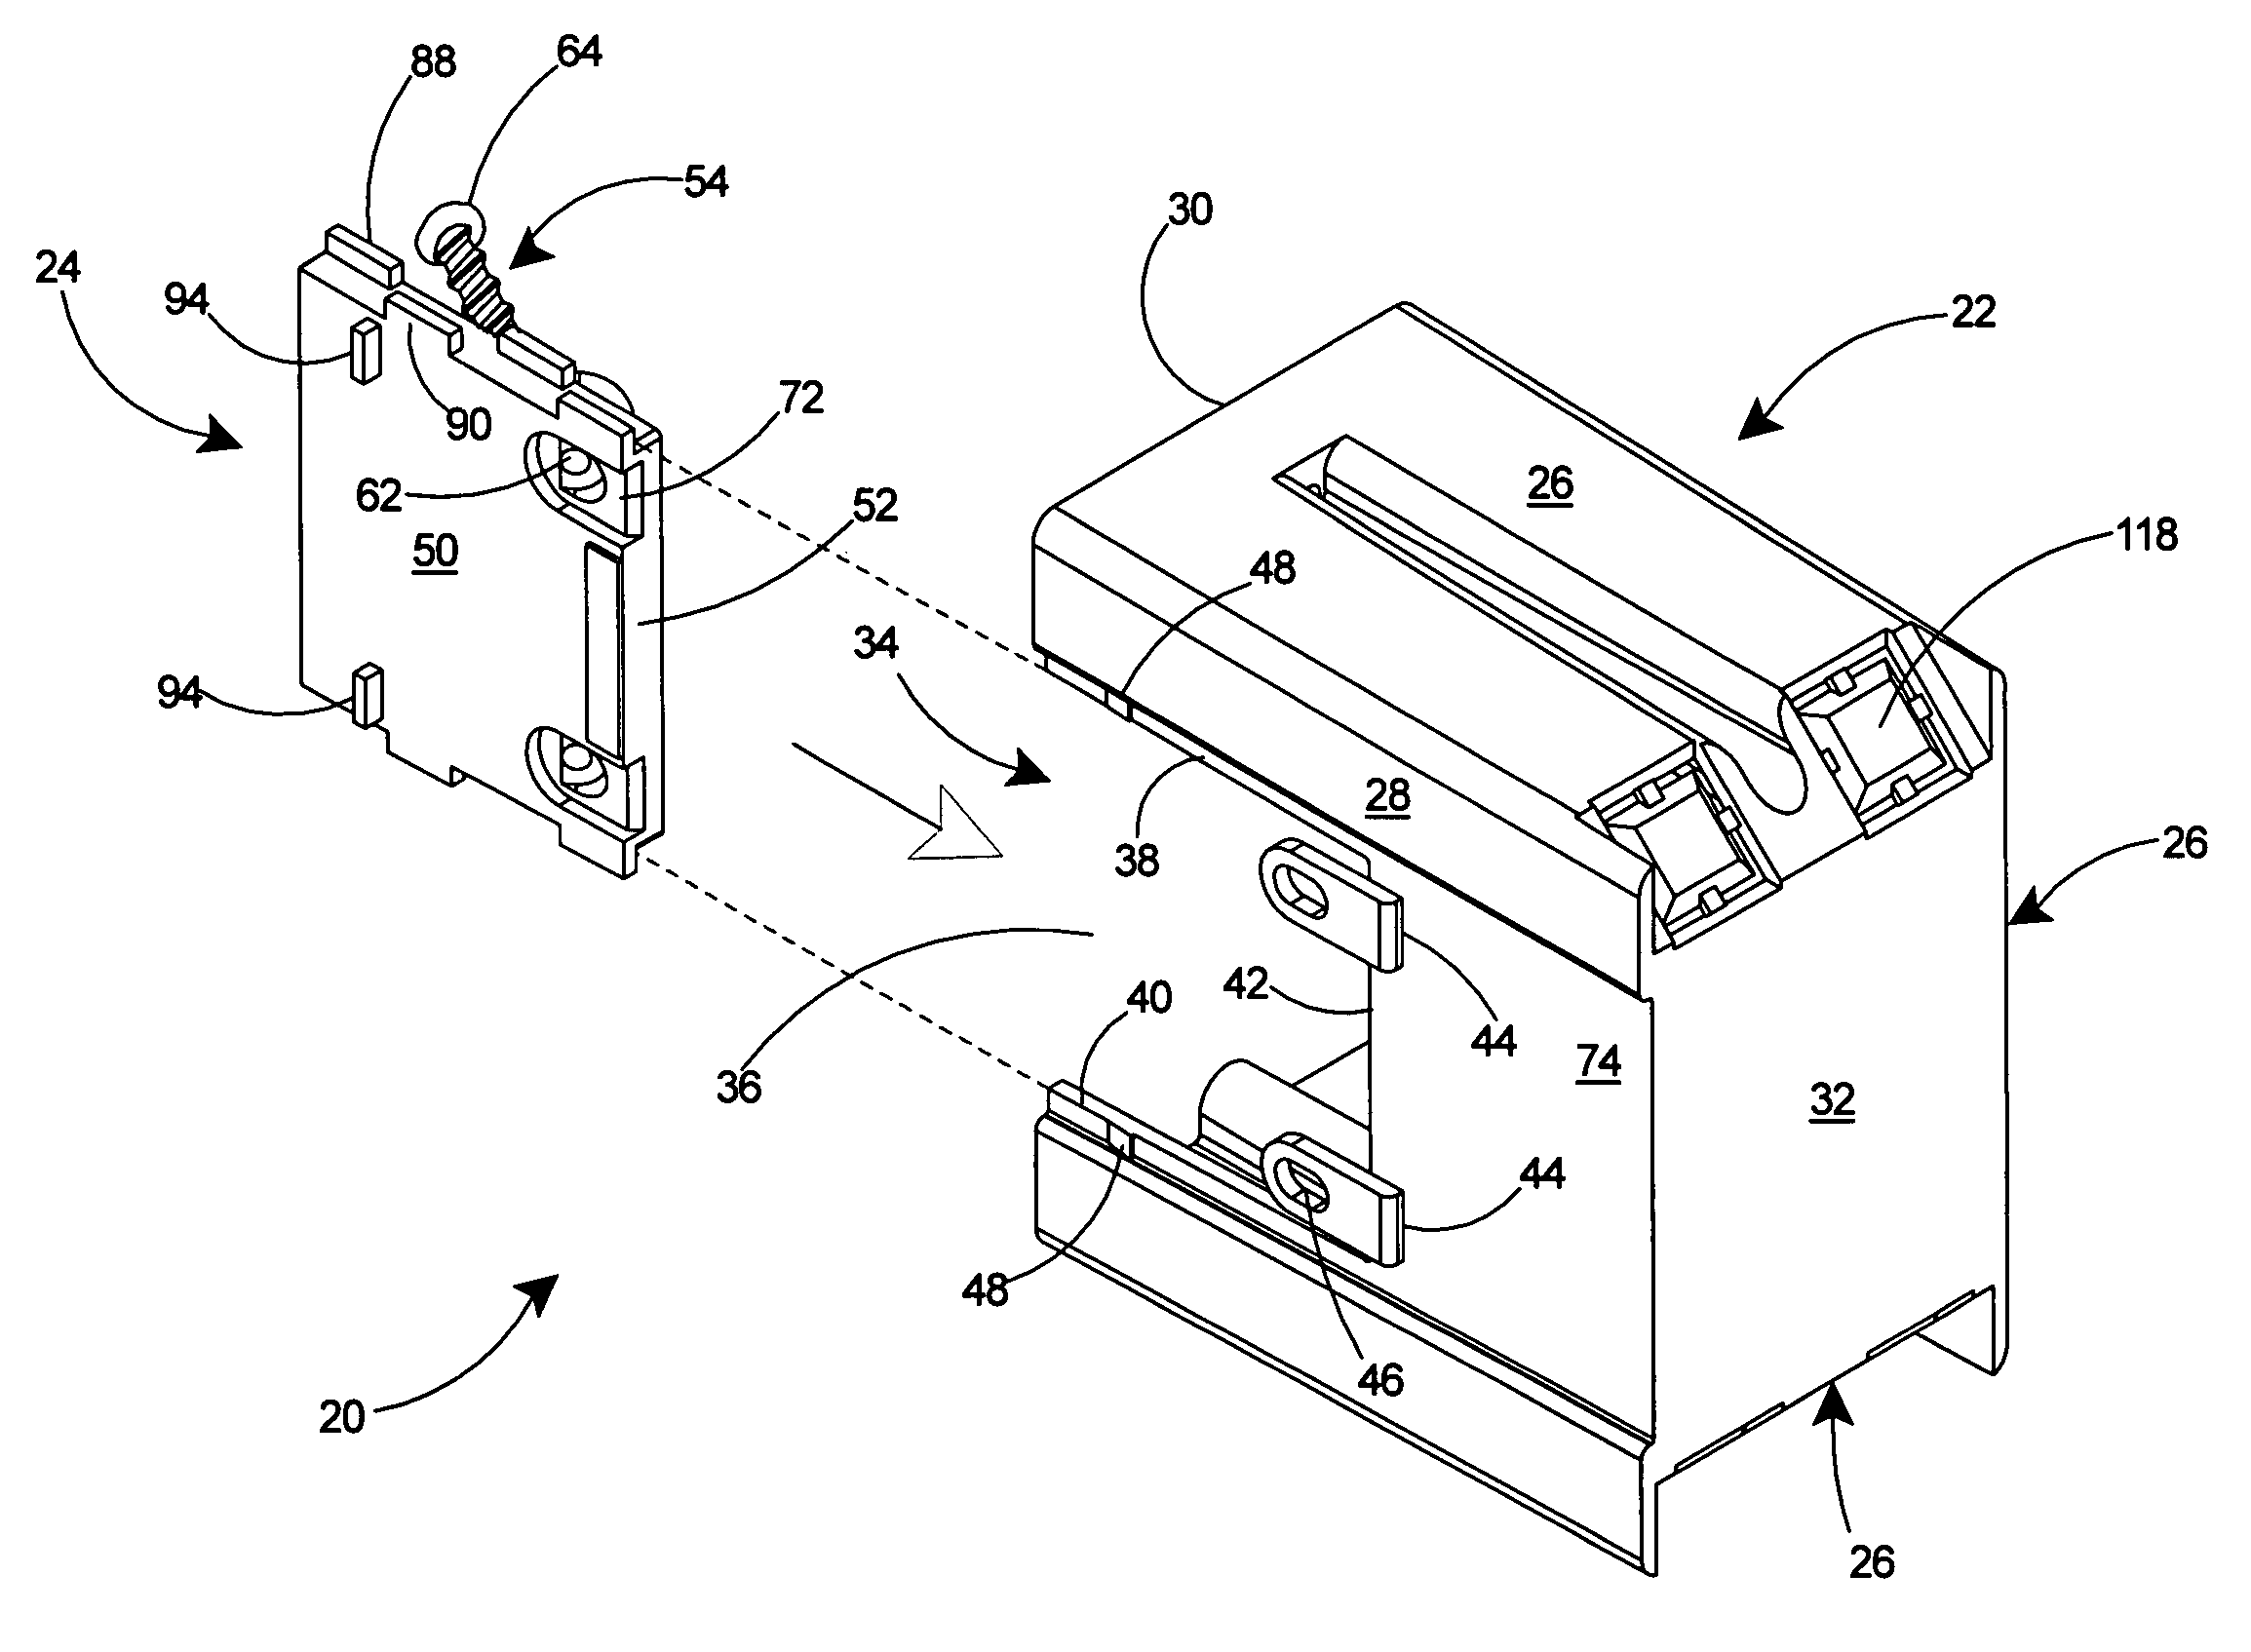 Large volume electrical box with internal mounting arrangement